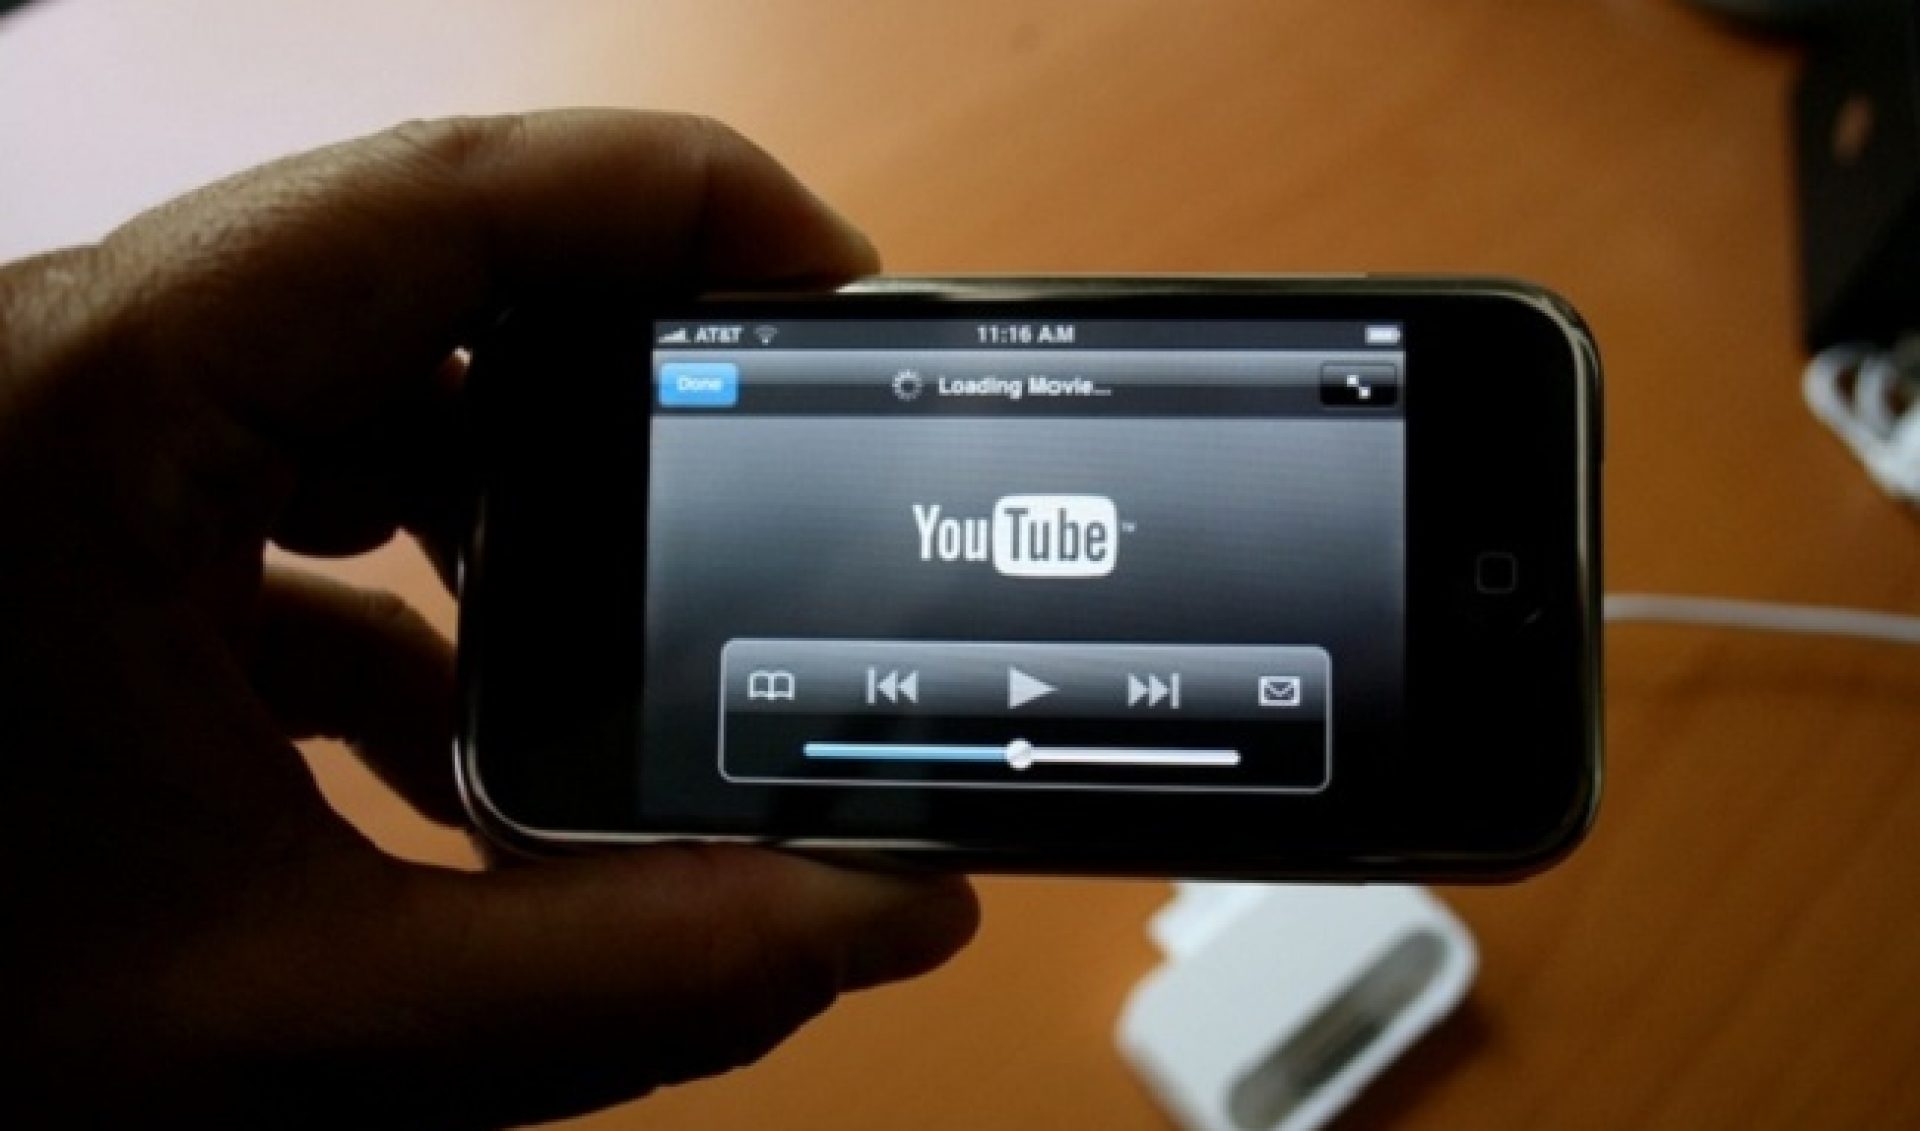 About 50% Of YouTube’s Traffic Now Comes From Mobile Devices